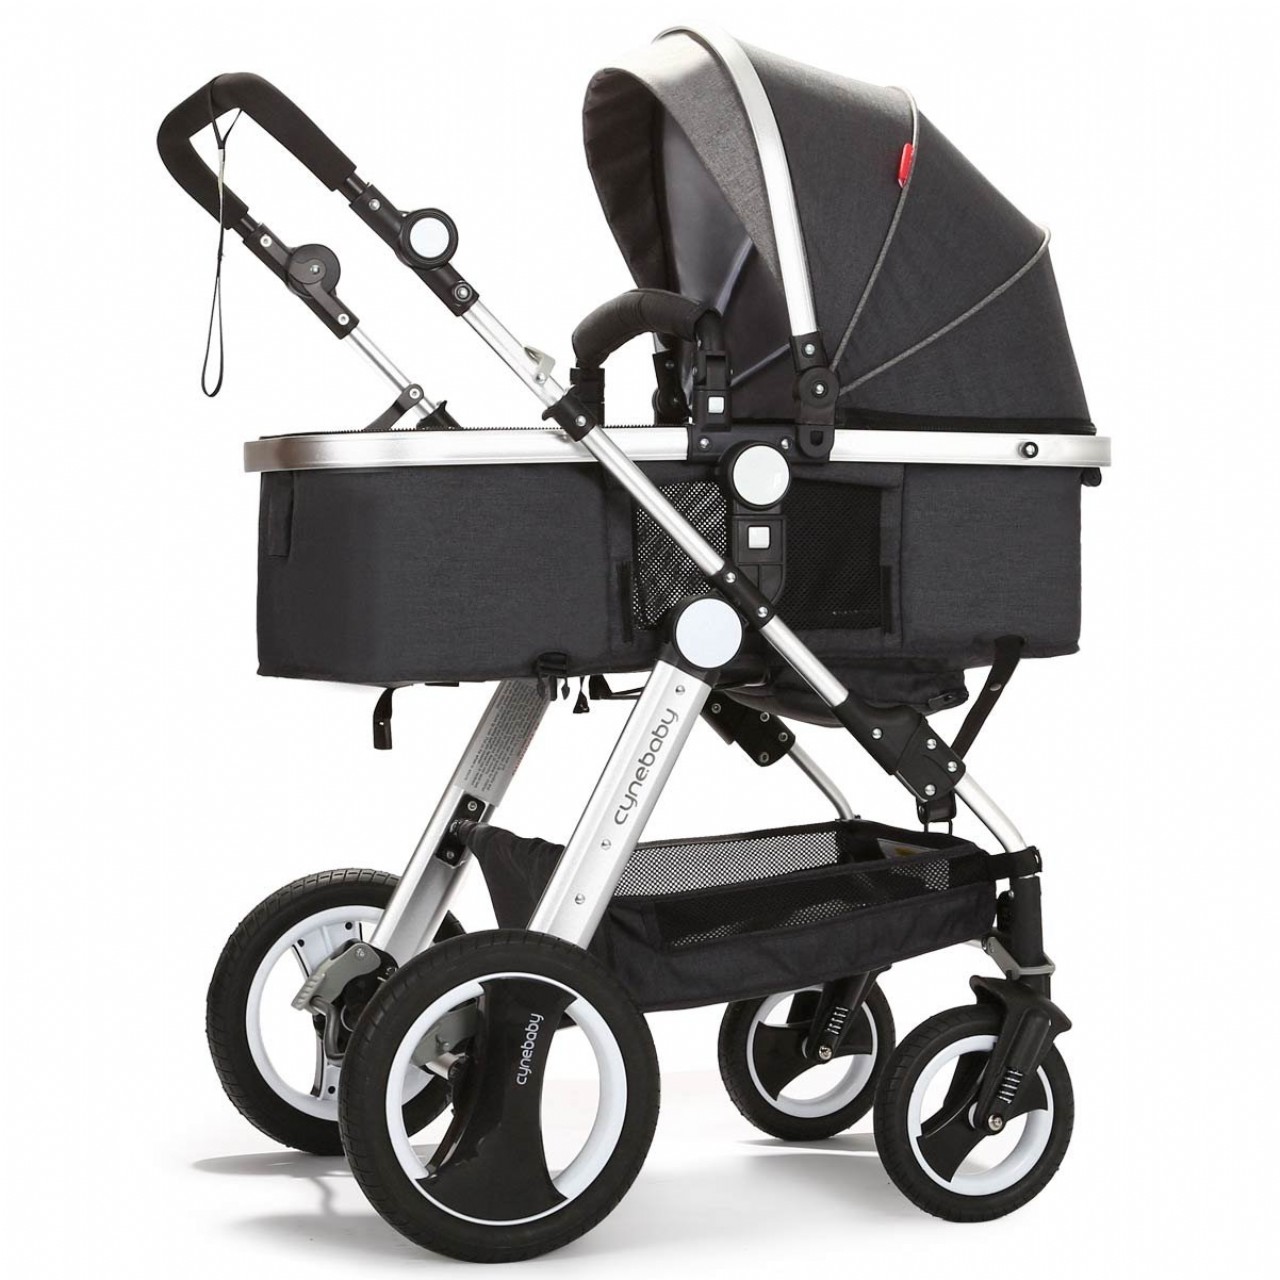 cynebaby Infant Toddler Baby Stroller Carriage Compact Pram Strollers ...